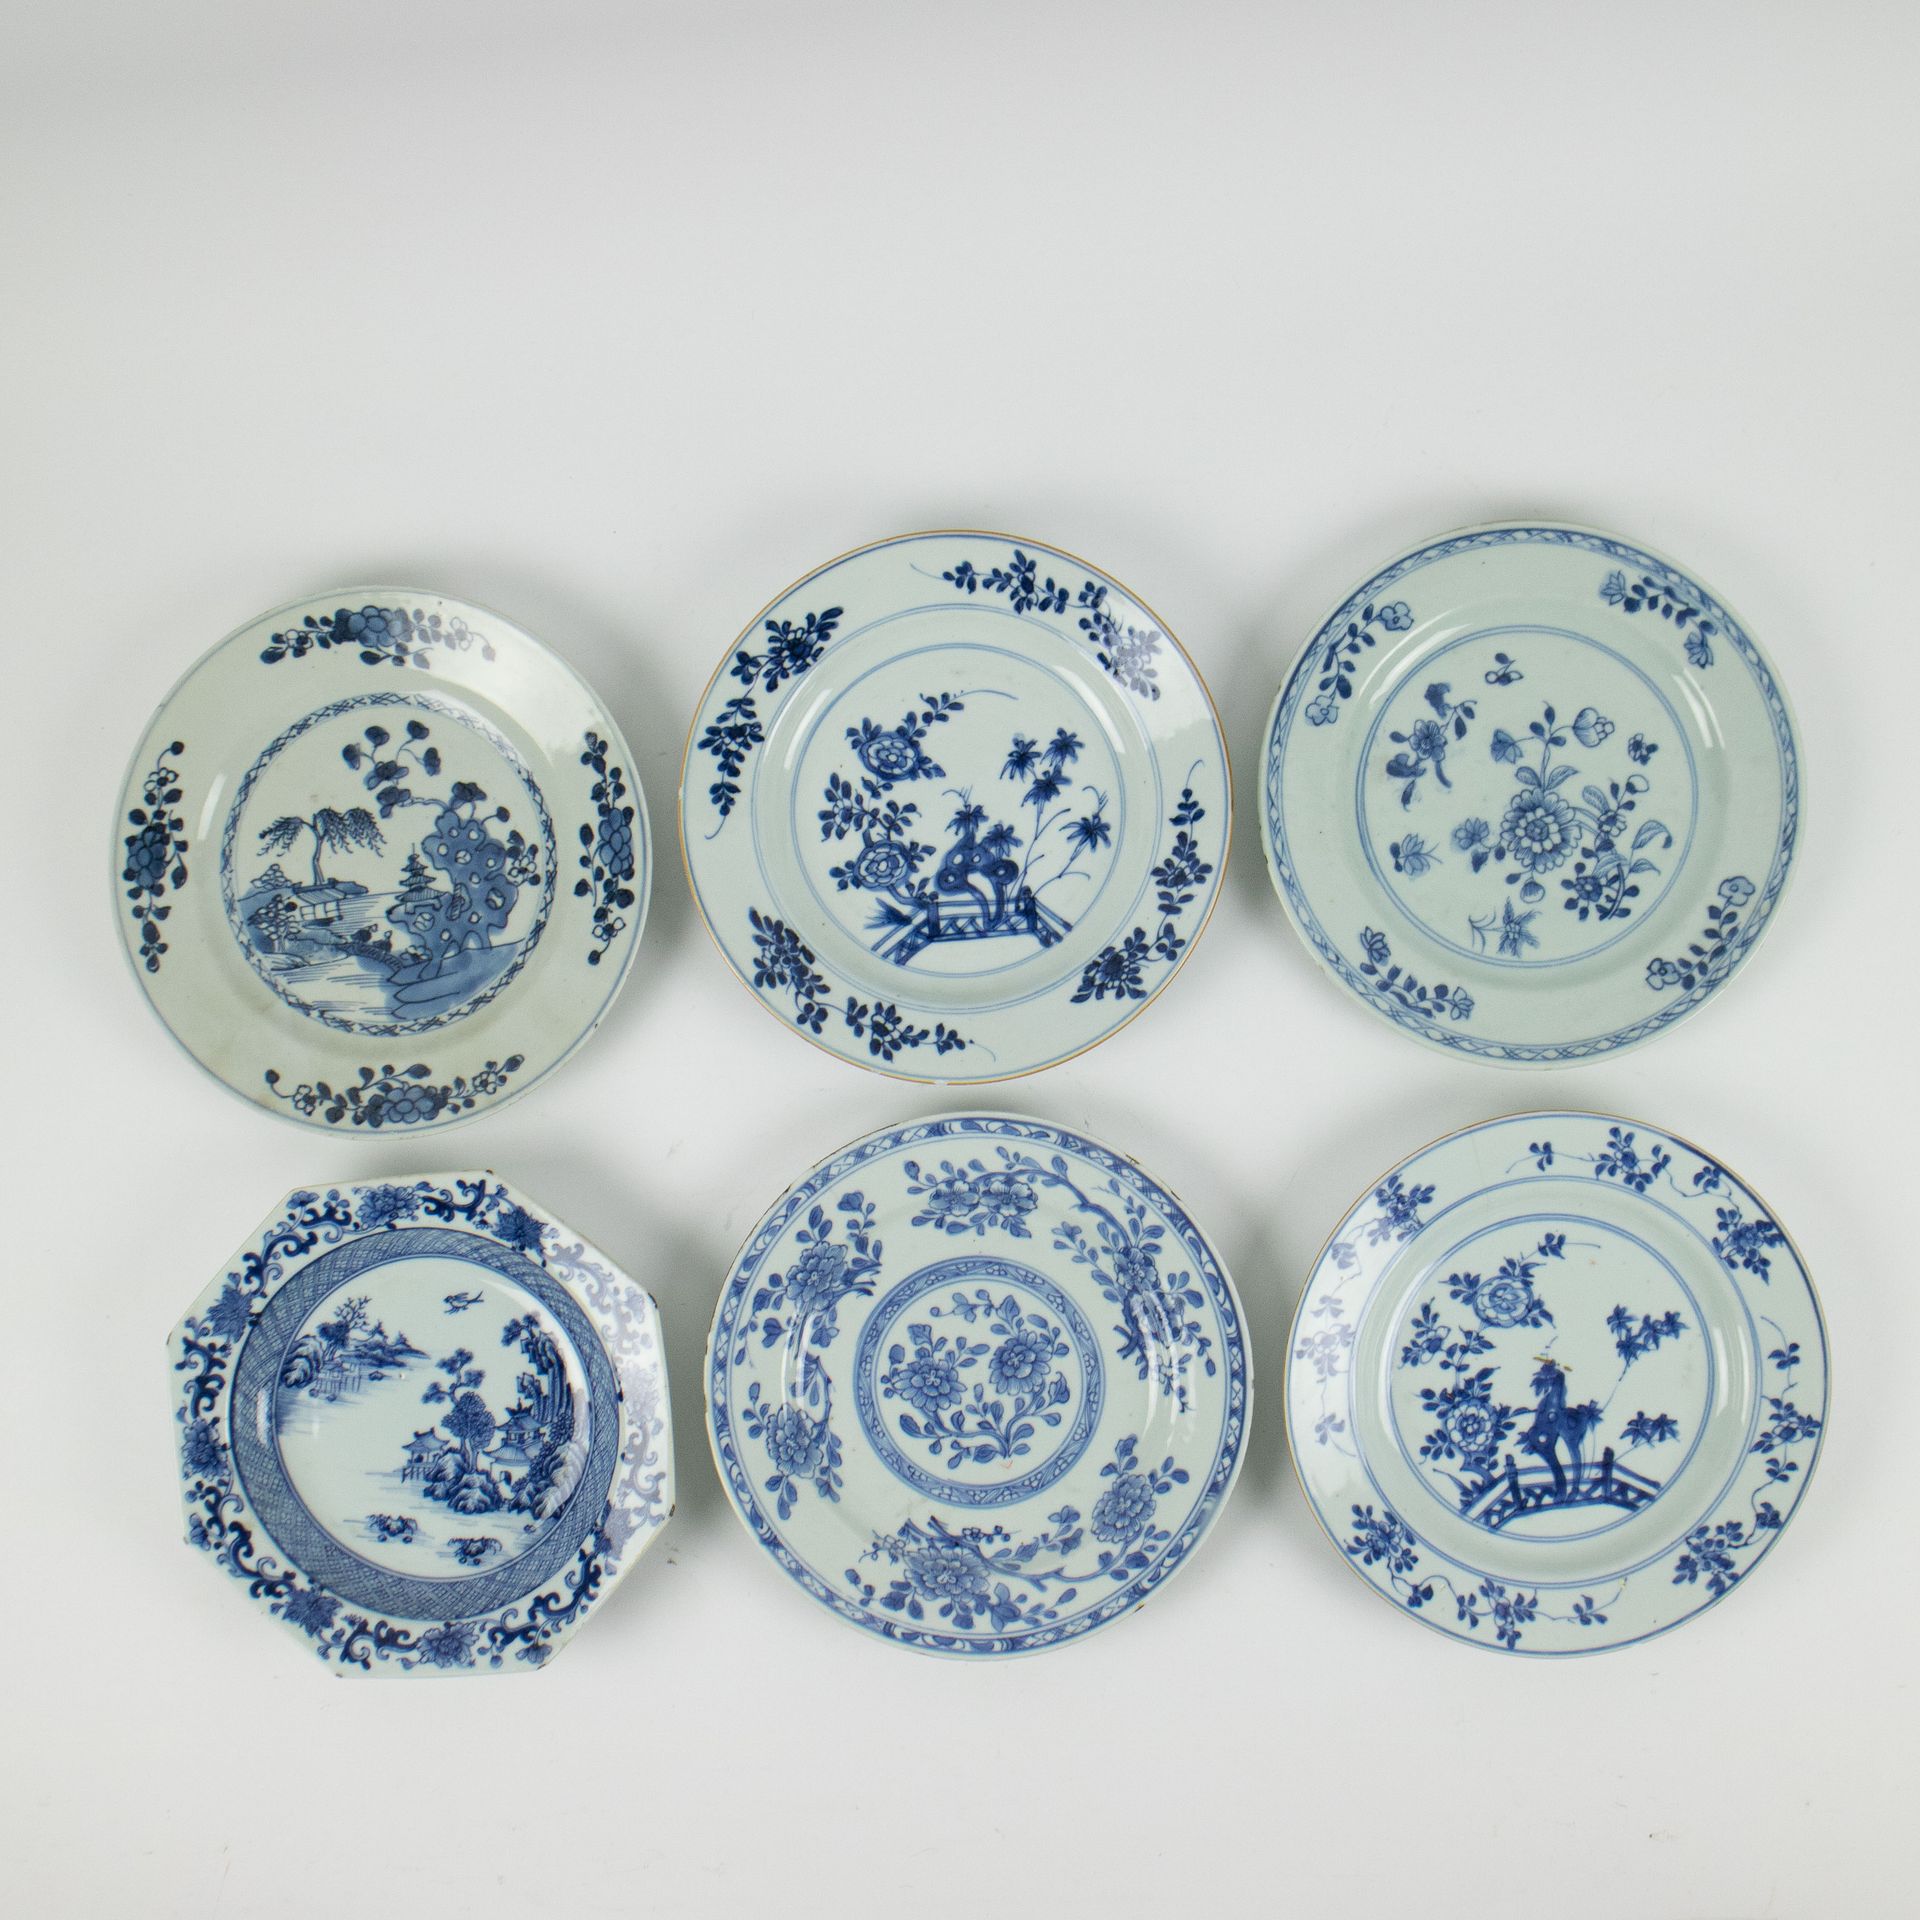 6 blue and white Chinese porcelain plates, Qianlong 6 blauwwitte chinesische Bor&hellip;